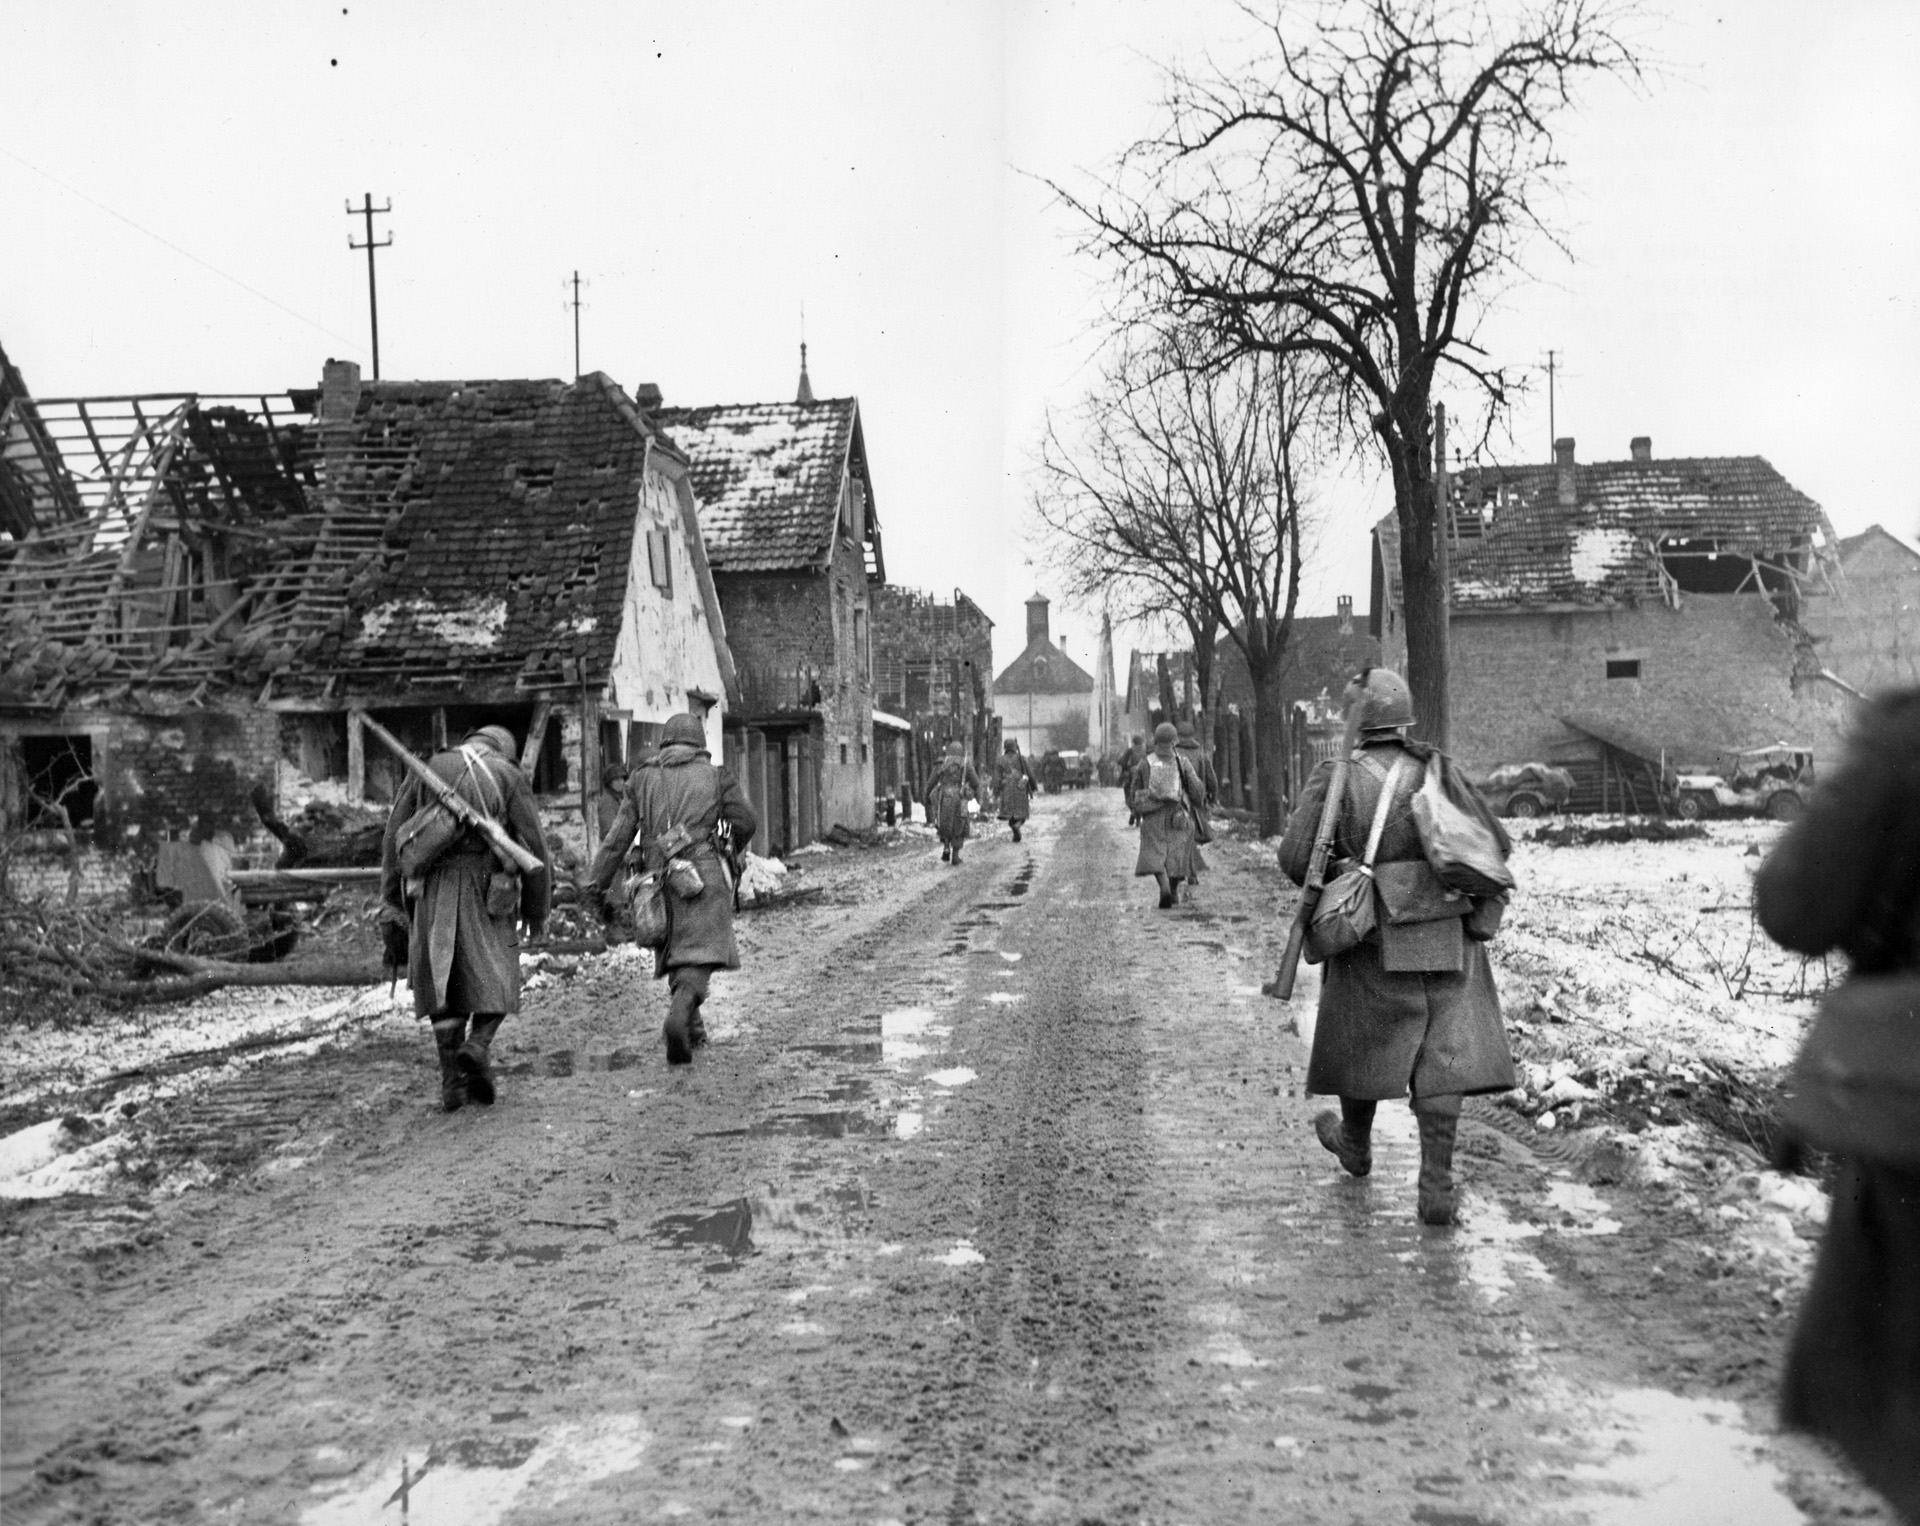 Soldiers with the 75th Infantry Division march through a Belgian town as they drive back the Germans. Bush, in an effort to get out of conditions like this, eventually found himself fighting in Bastogne with the 101st Airborne Division.